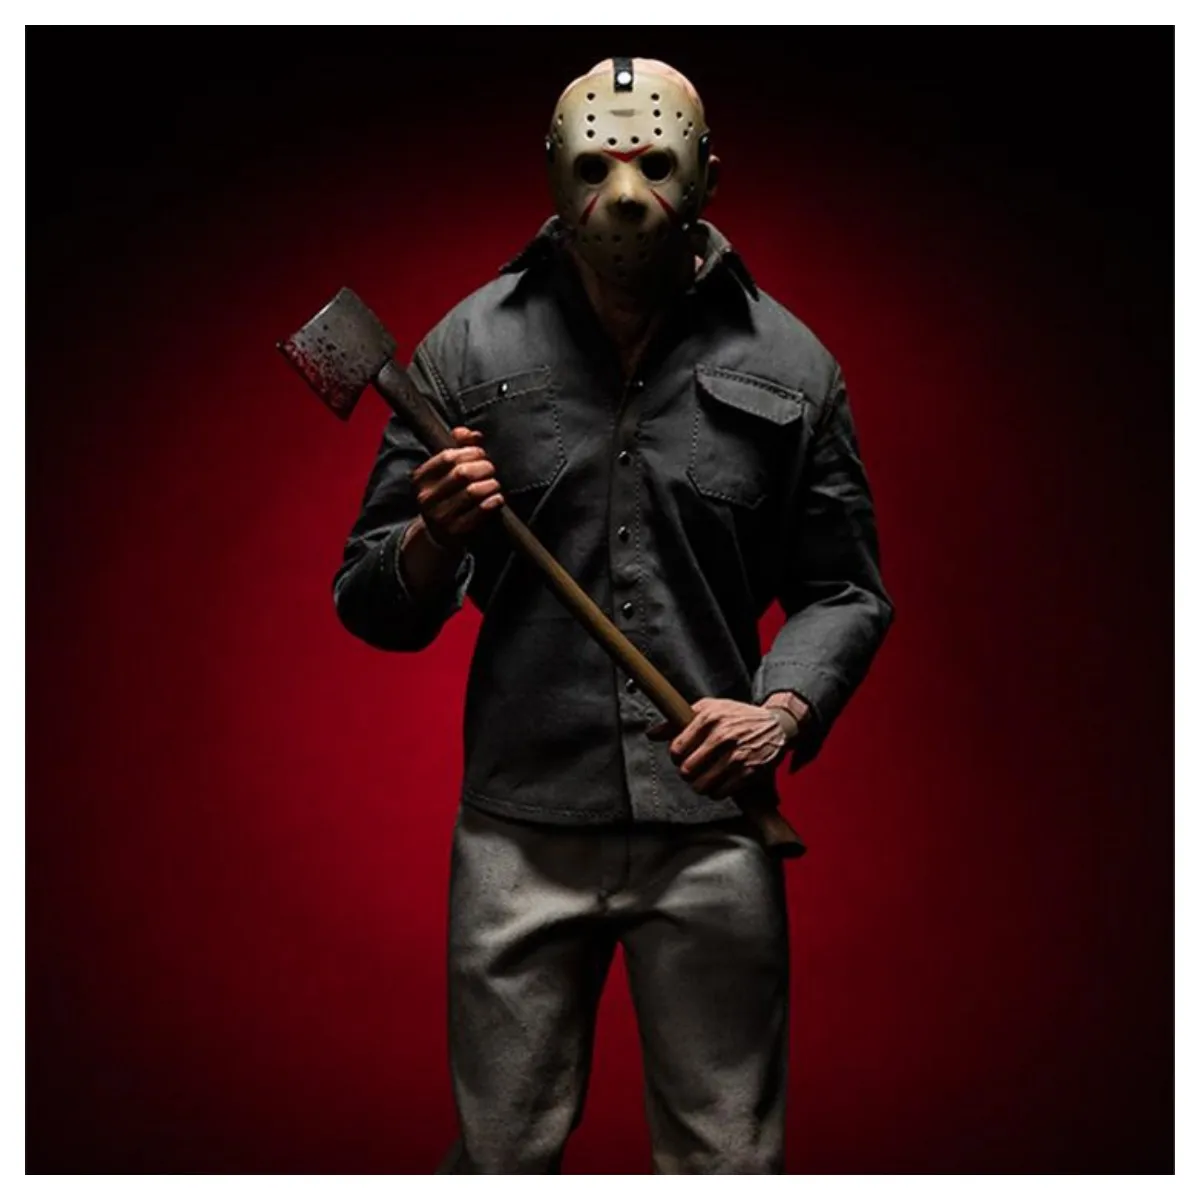 

Sideshow 100360 1/6 Scale Friday the 13th Jason Voorheesks Derek Mears Figure 12 inches Action Head Body with Mask Model for Fan